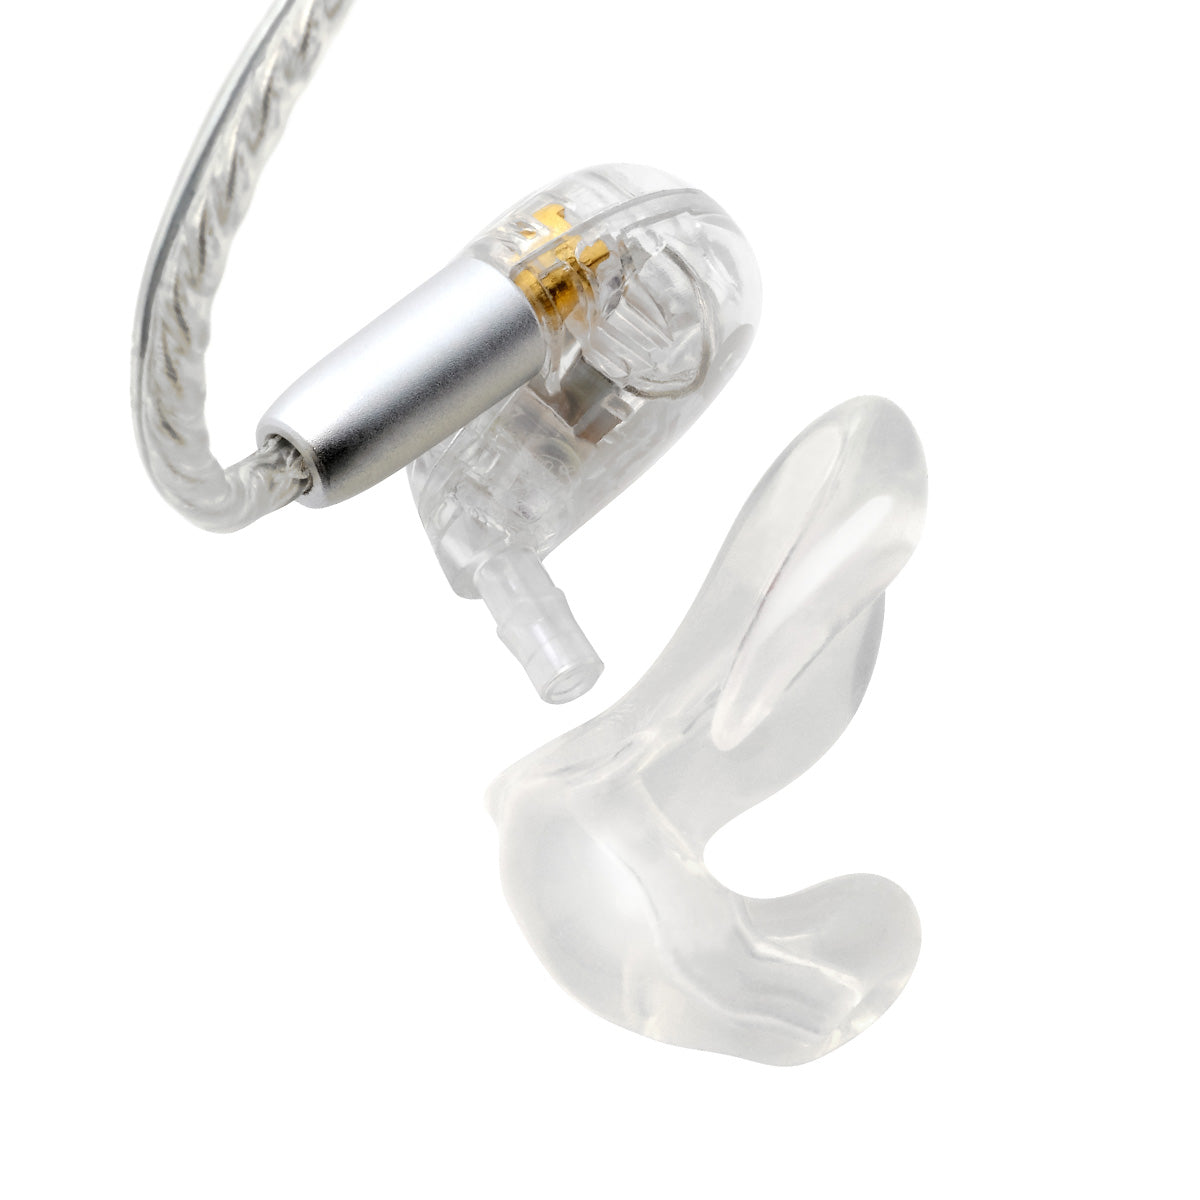 ADV. Model 3 Custom High-resolution MMCX On-stage Custom-fit In-ear Monitors for Musicians Entry Performance WFH Work From Home